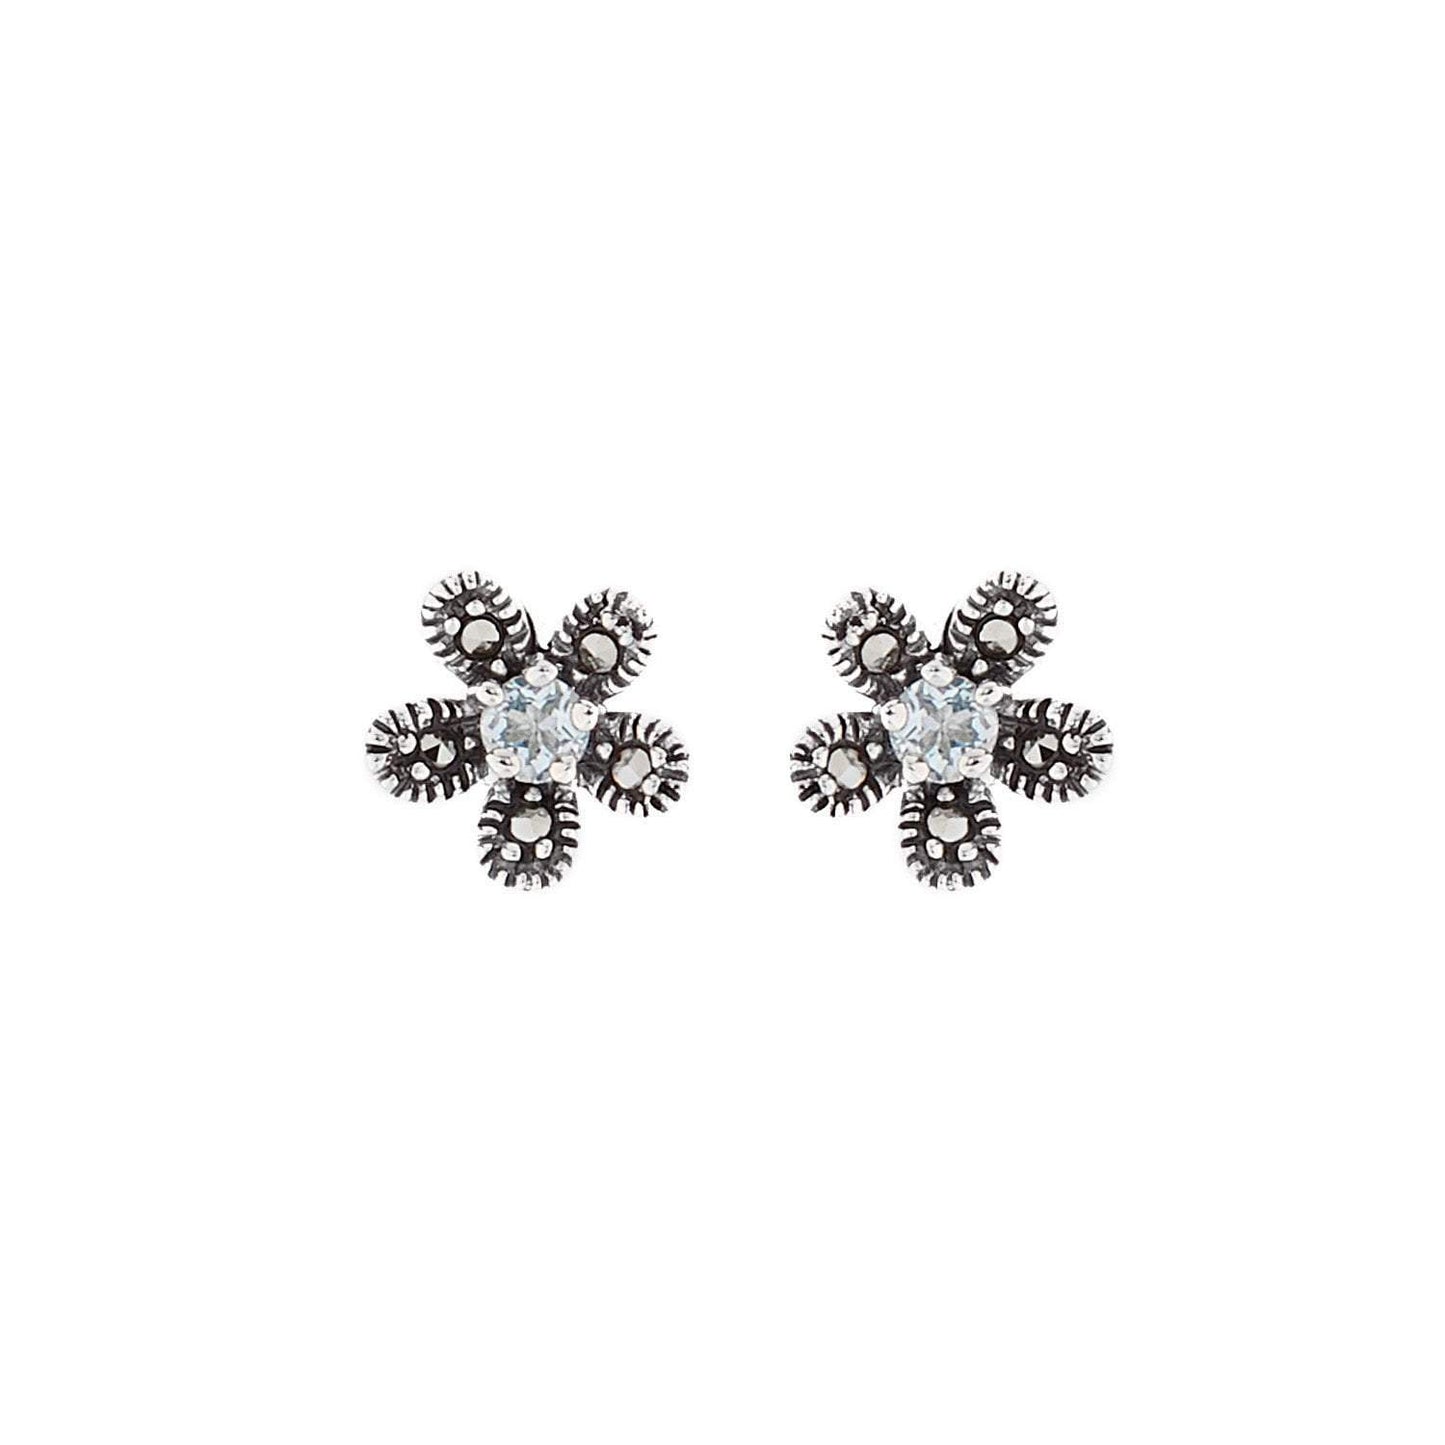 Hermia: Flower Stud Earrings in Blue Topaz, Marcasite and Sterling Silver